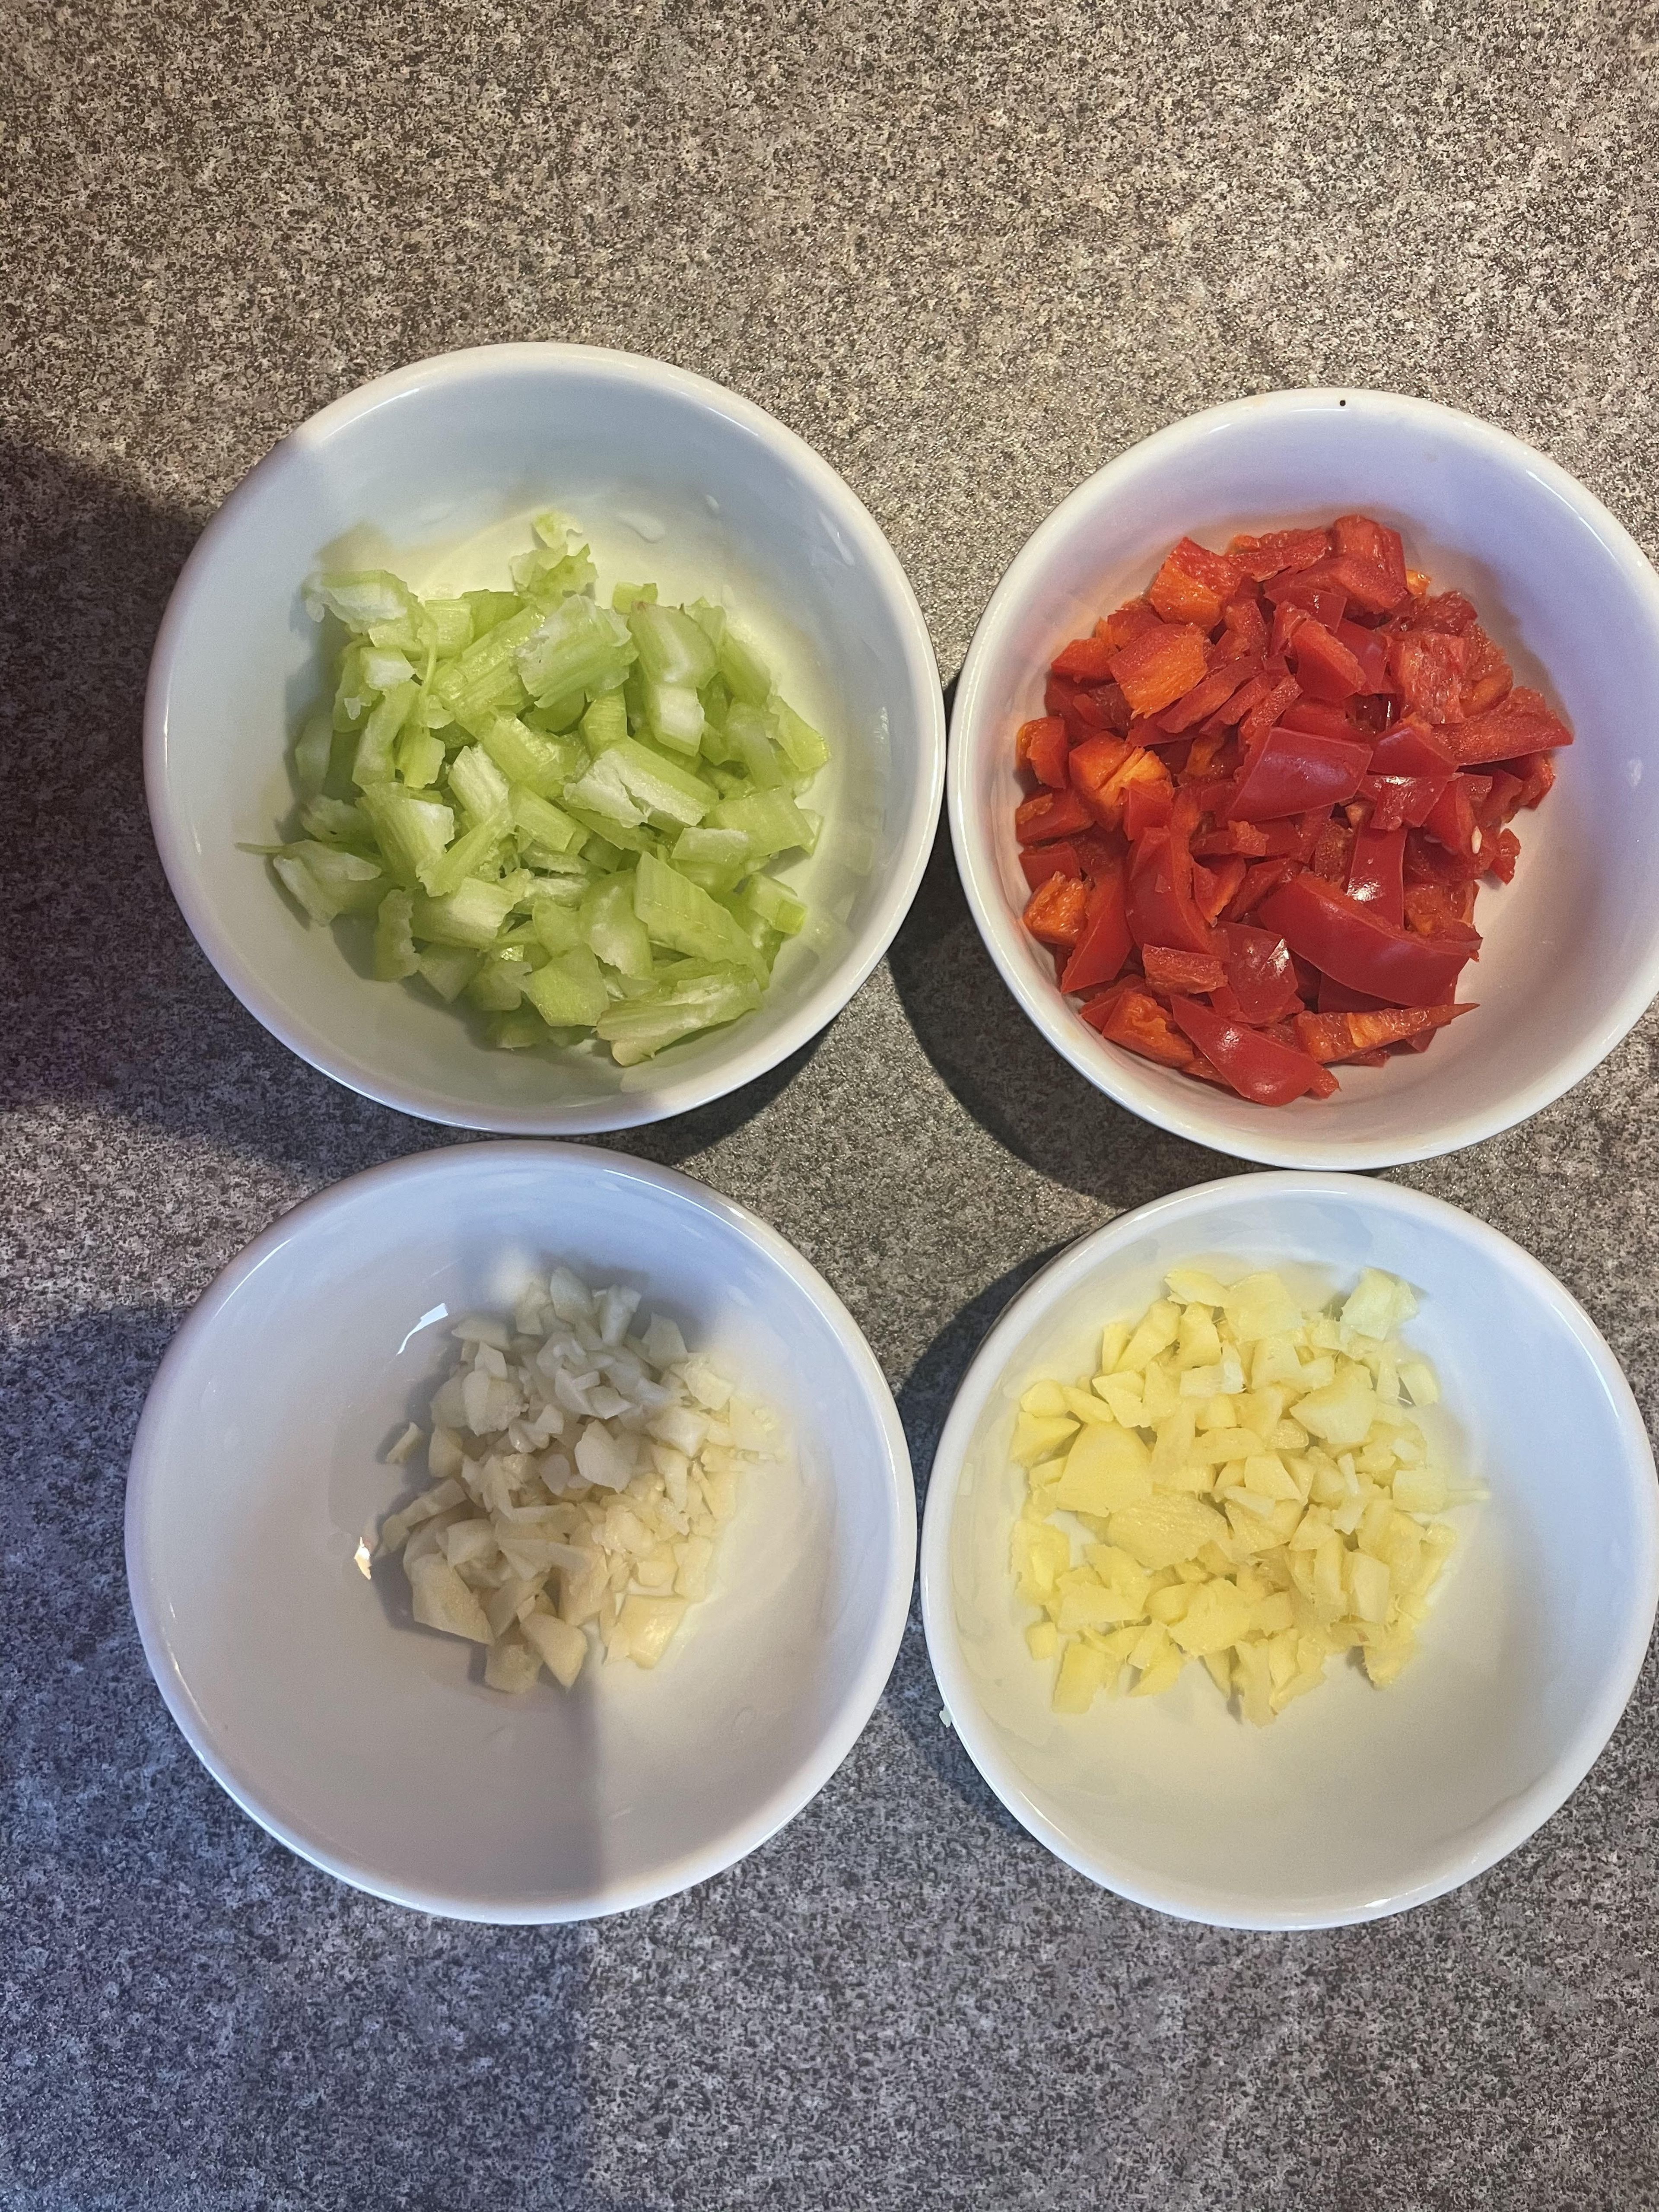 Deseed the chillies and chop finely, after this is done don't forget to wash your hands. Next finely chop the Garlic, Ginger and 1/2 head of celery and place into different pots as shown